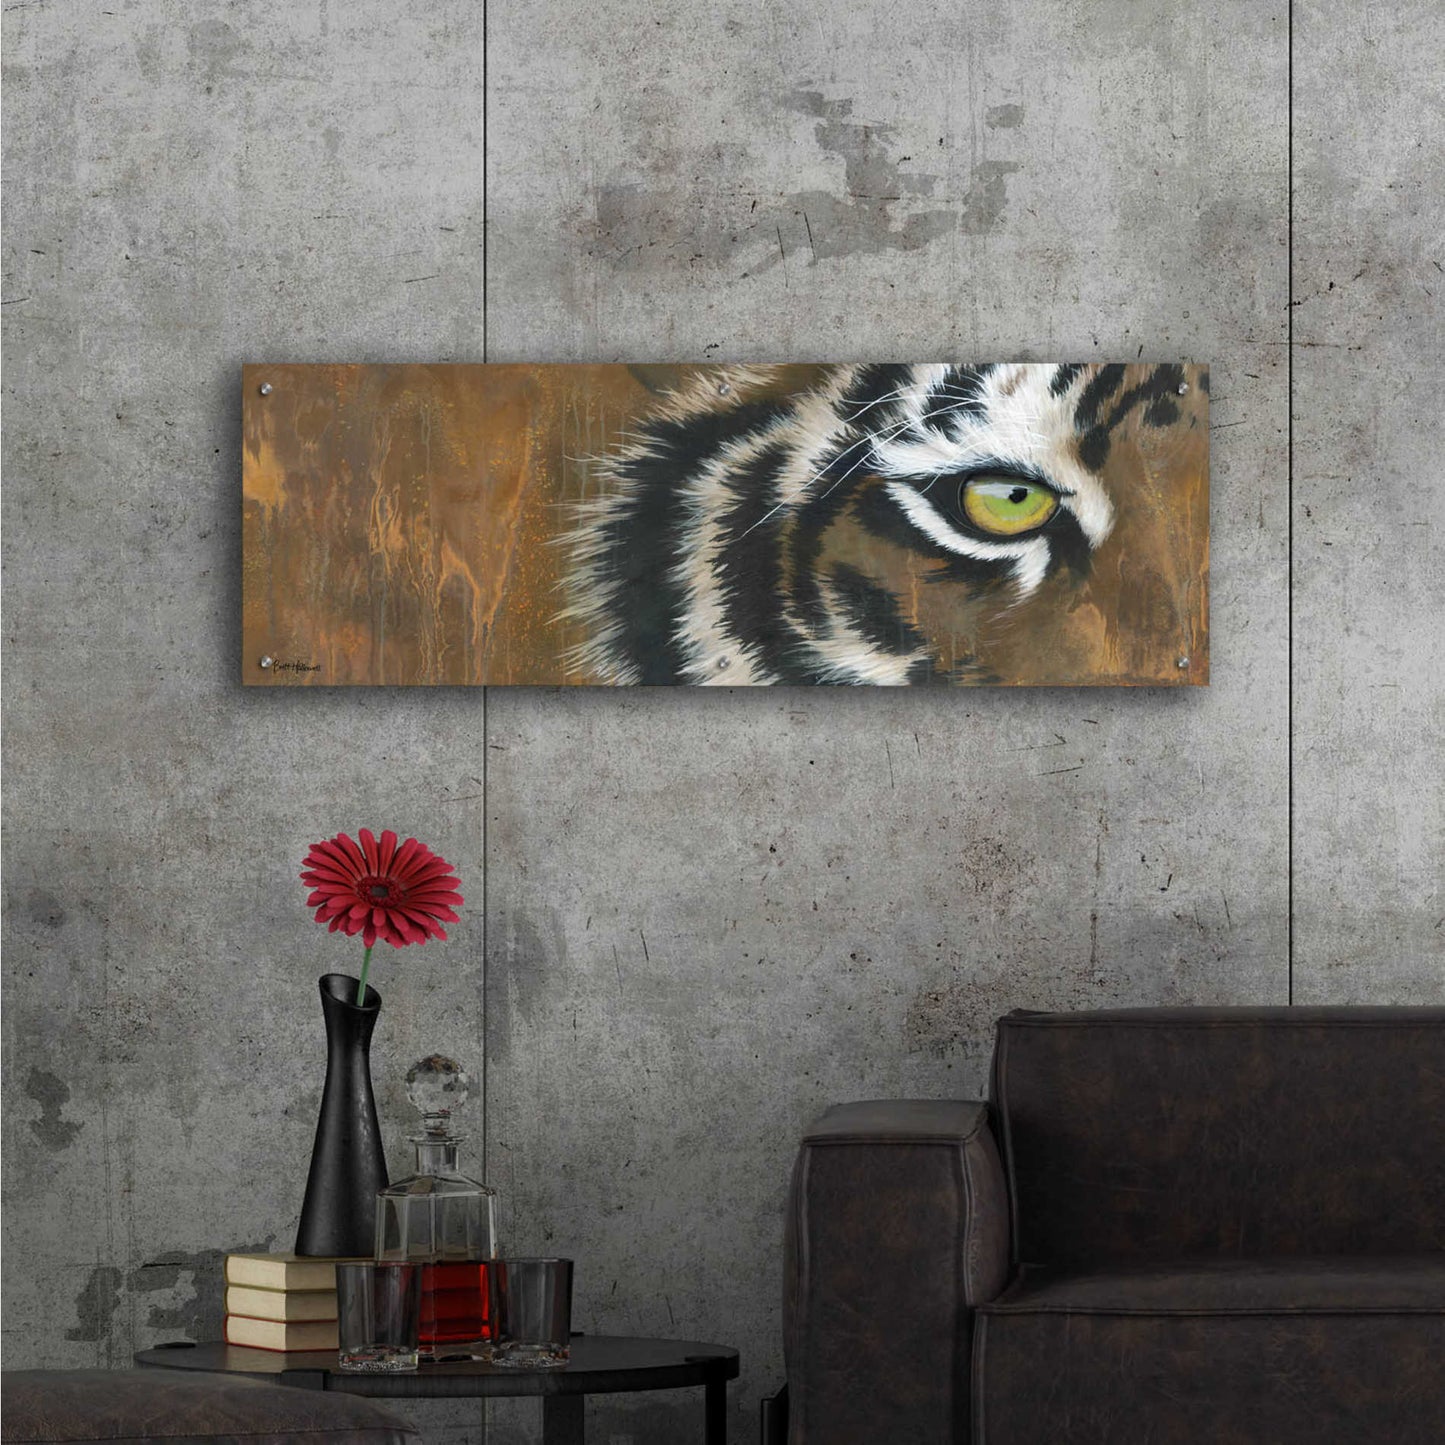 Epic Art 'Searching for the Man Cub' by Britt Hallowell, Acrylic Glass Wall Art,48x16